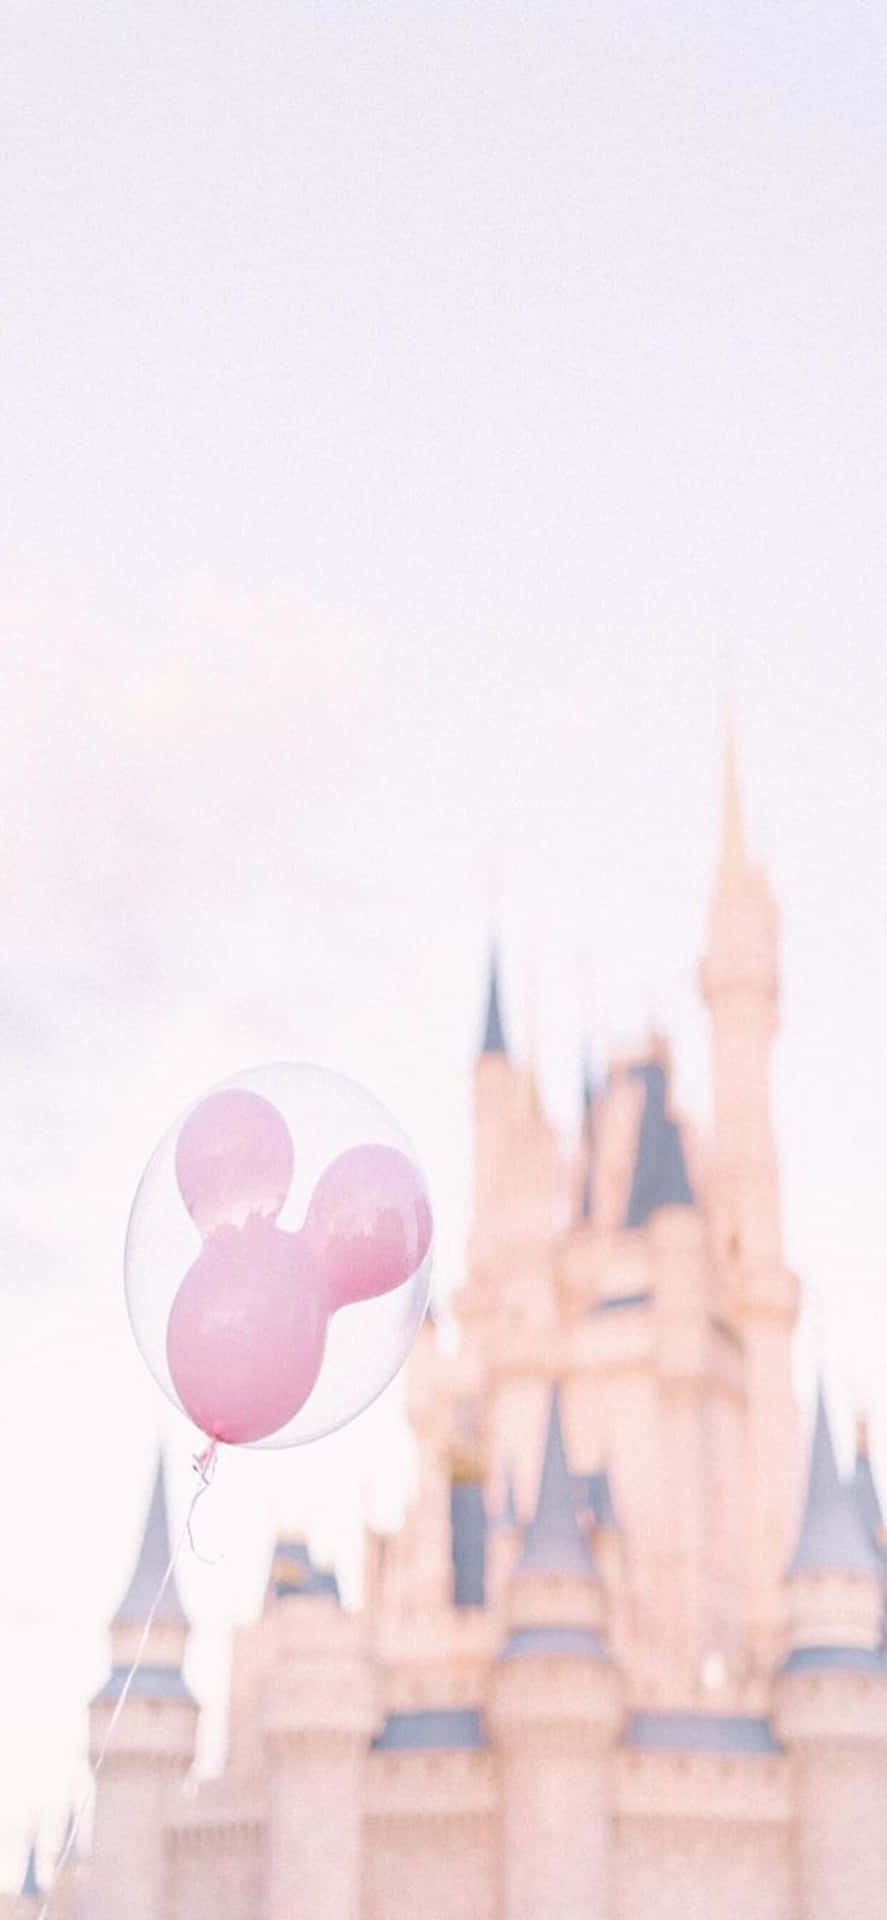 A Pink Balloon Is In Front Of A Castle